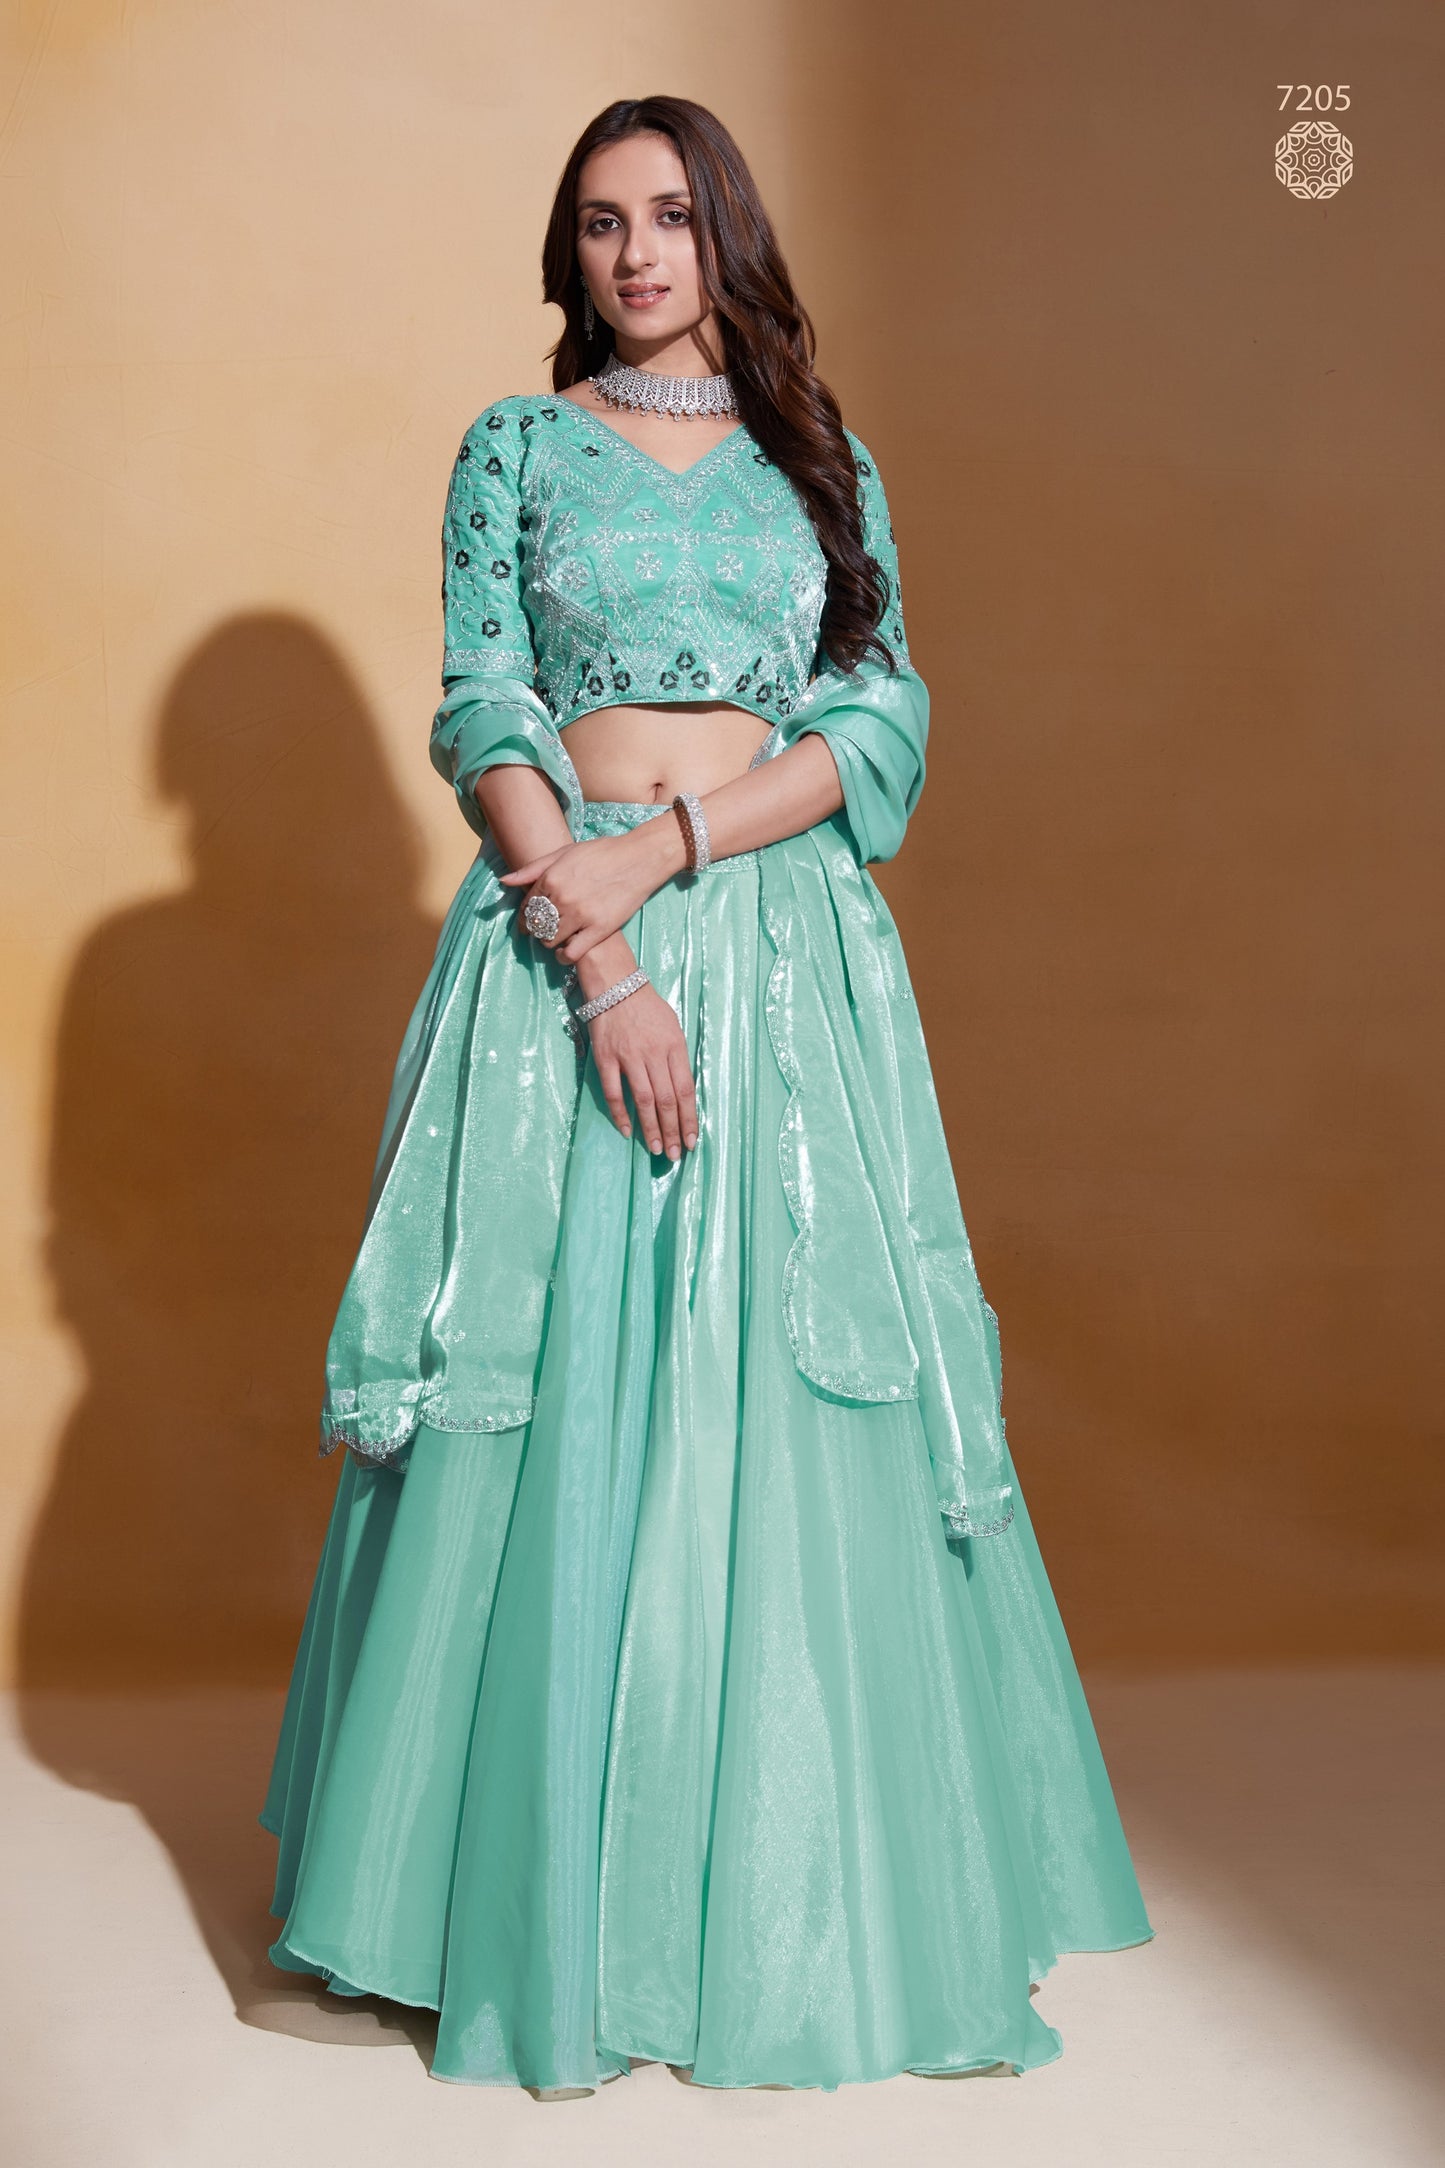 Sea Green Organza Silk Lehenga Choli 18 Meter Flair For Indian Festivals & Weddings - Sequence Embroidery Work, Thread Embroidery Work